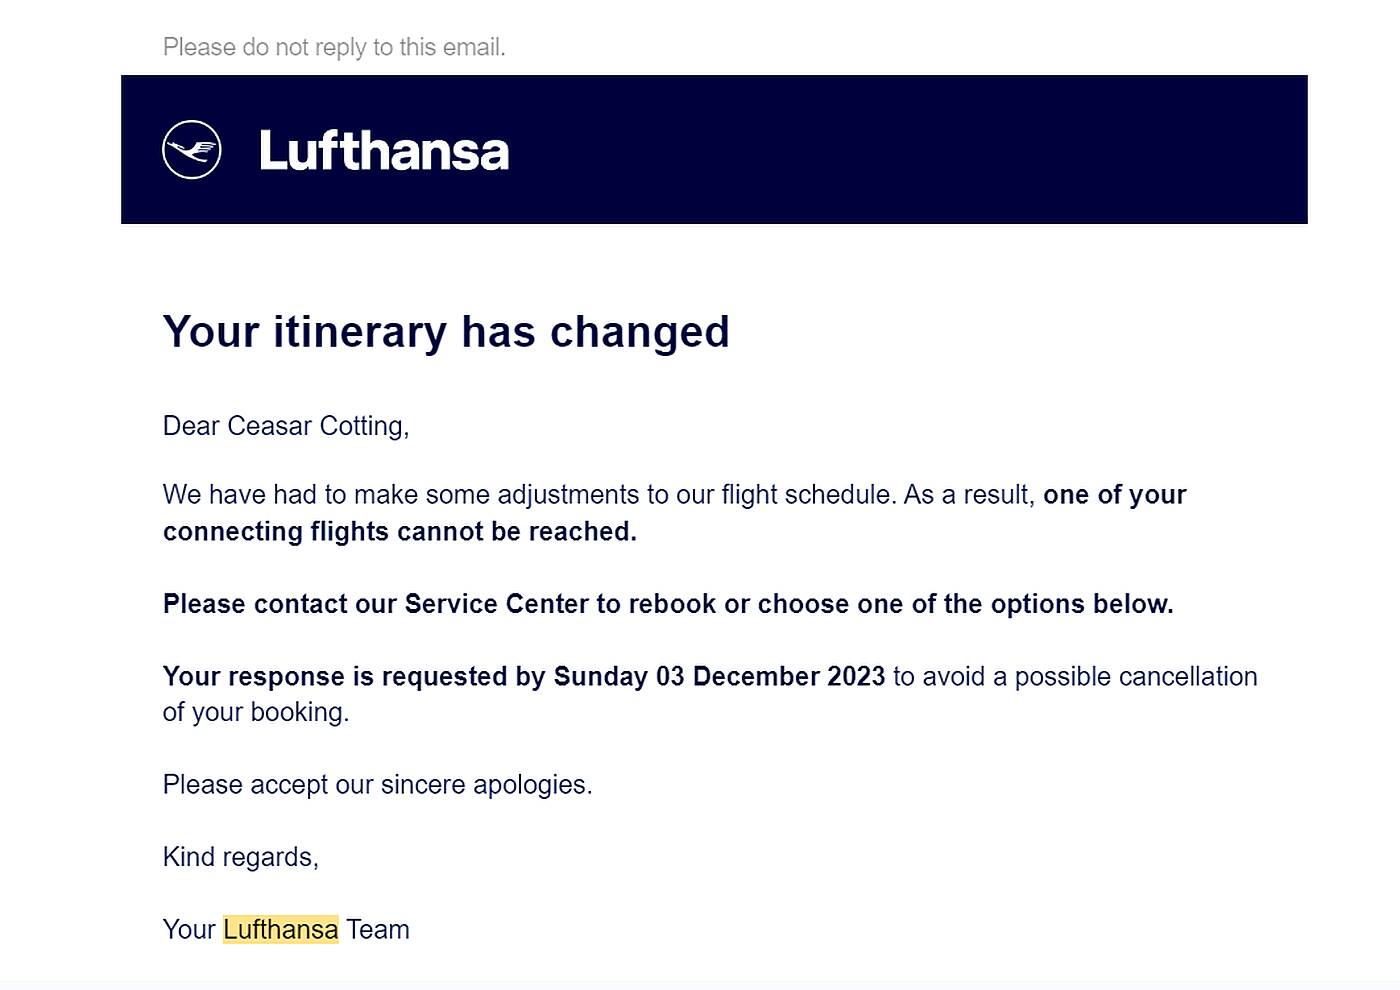 email from Lufthansa regarding itinerary change